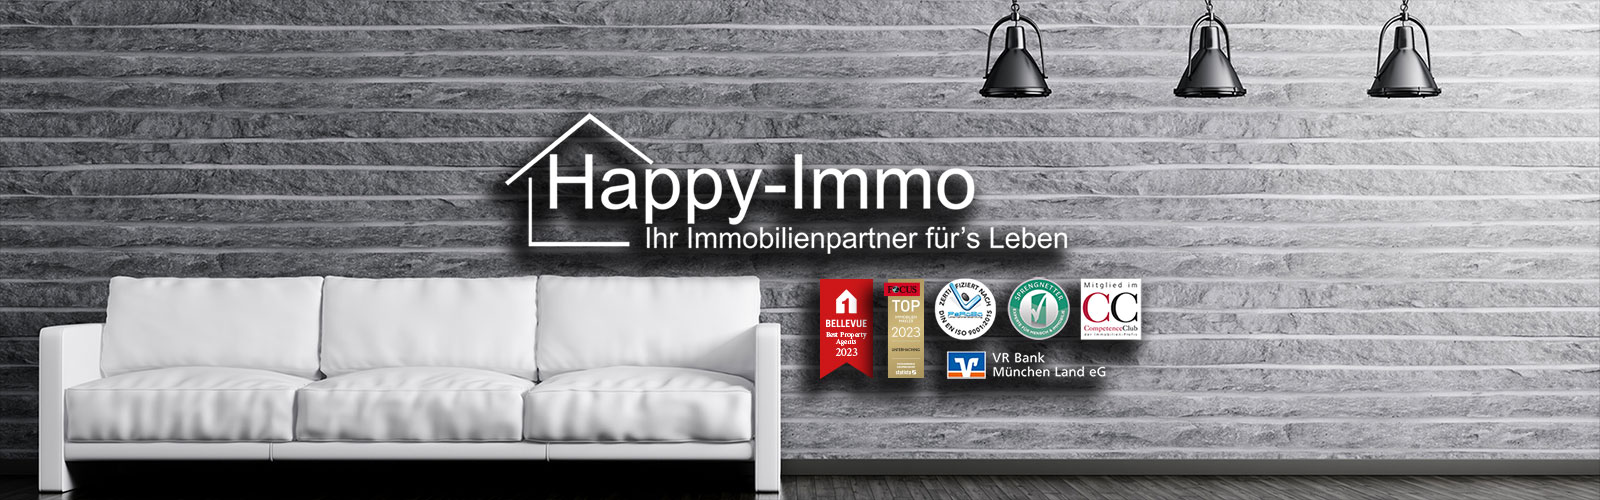 Happy Immo GmbH Immobilienmakler Miesbach 089-6494870